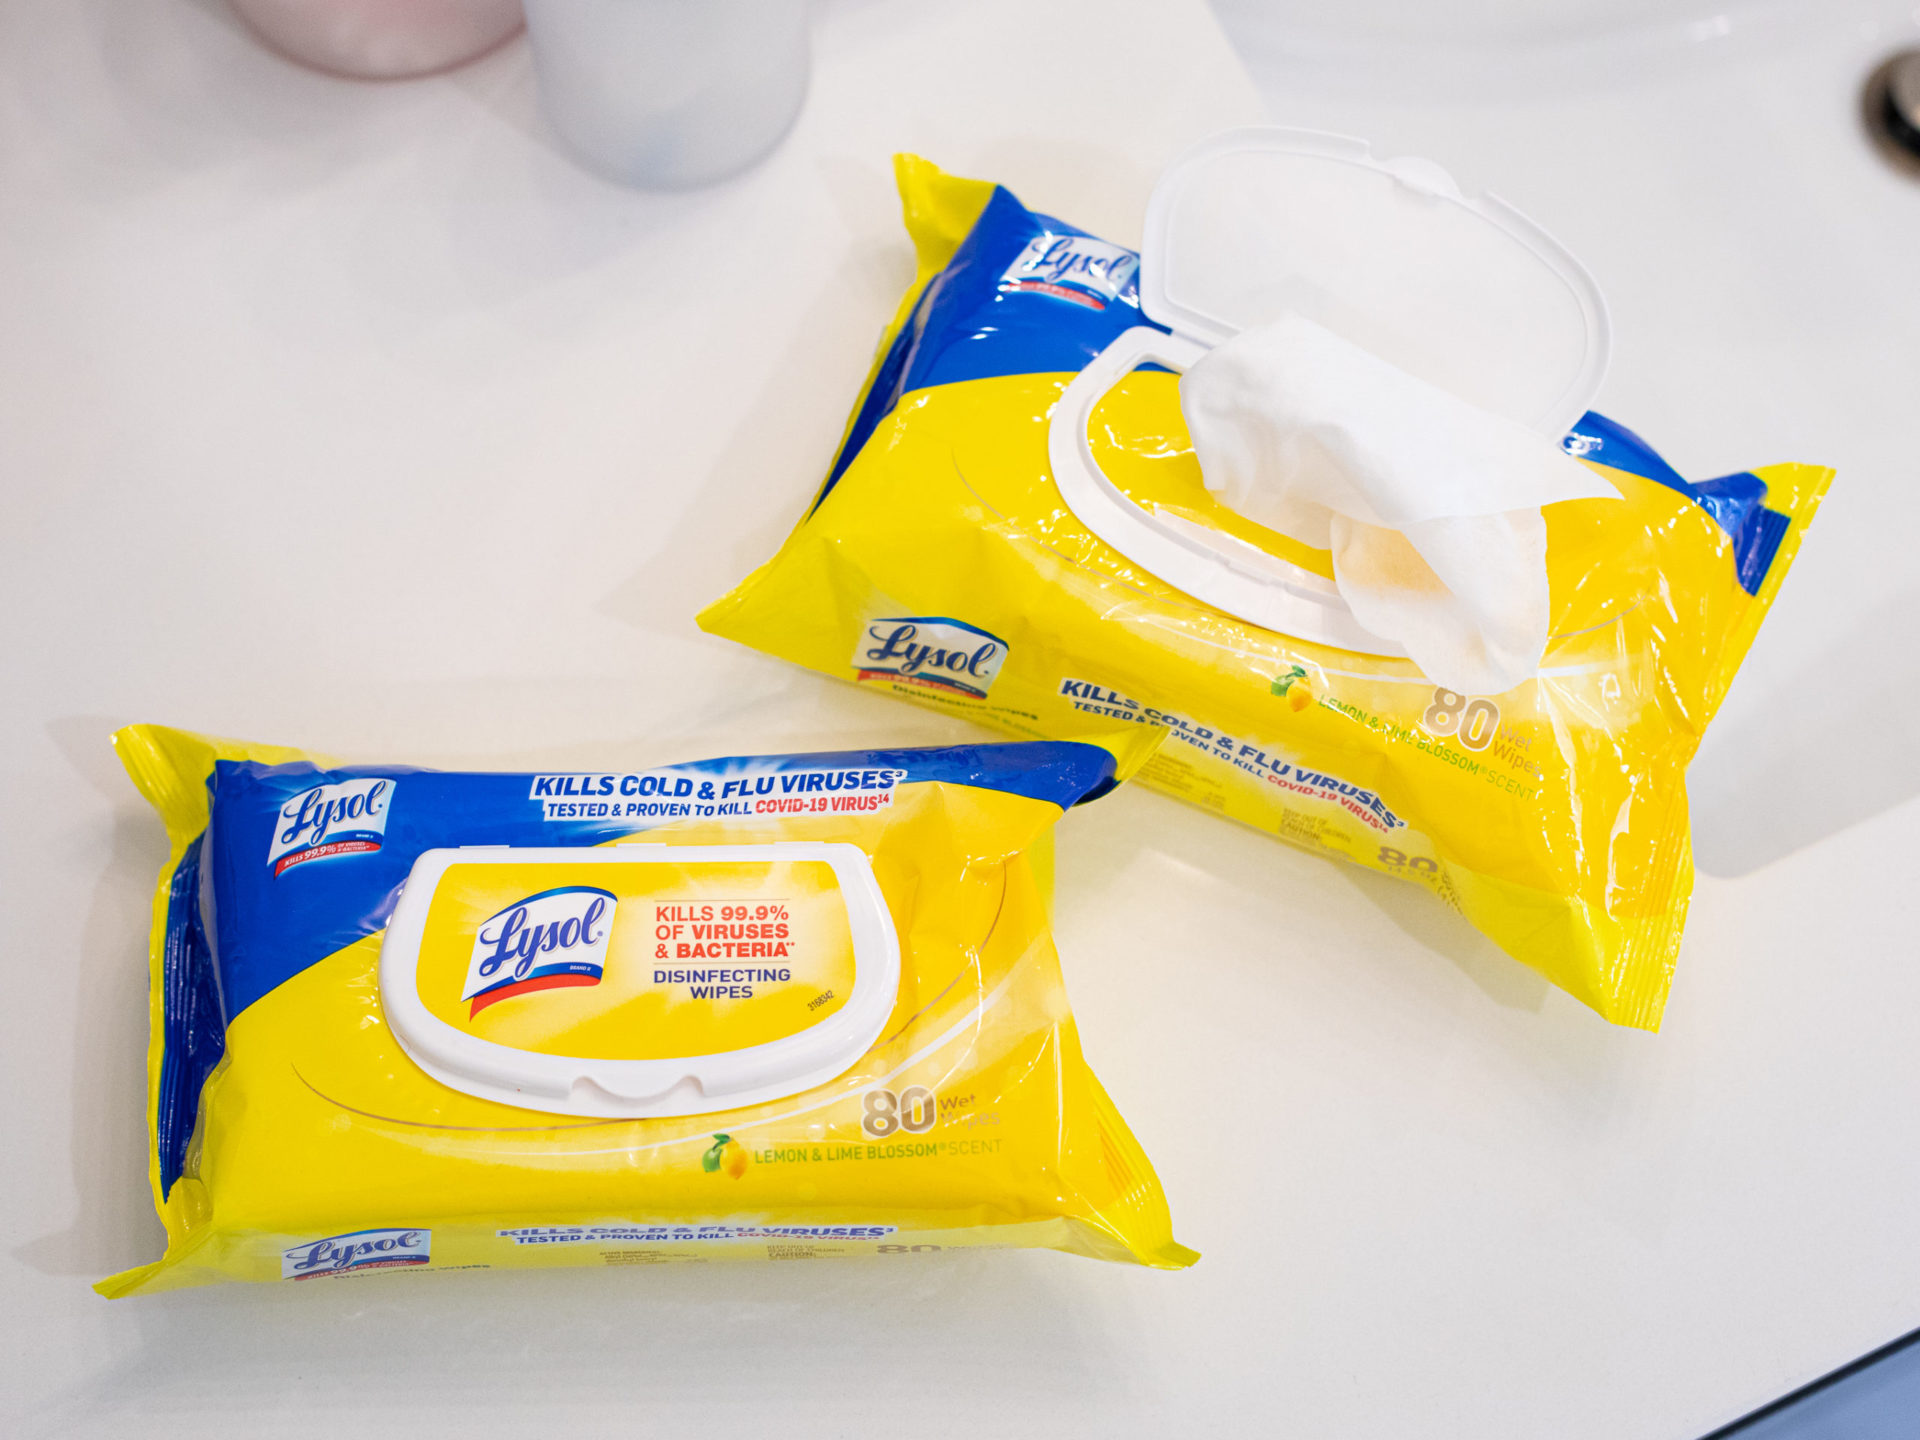 Get Lysol Disinfecting Wipes For Just $2.40 At Publix